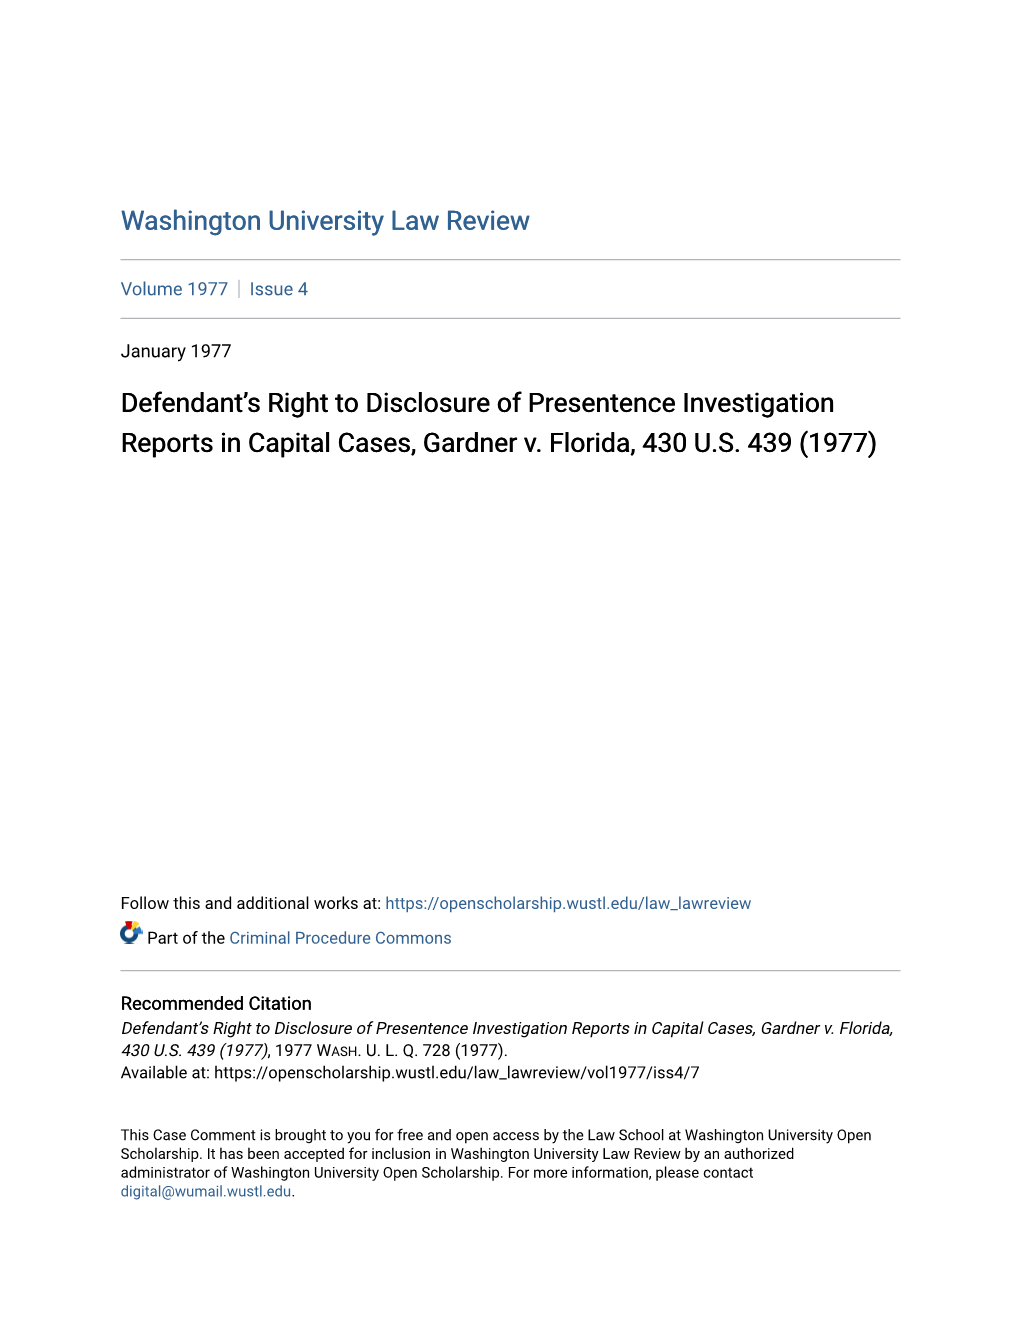 DEFENDANT's RIGHT to DISCLOSURE of PRESENTENCE INVESTIGATION REPORTS in CAPITAL CASES Gardner V